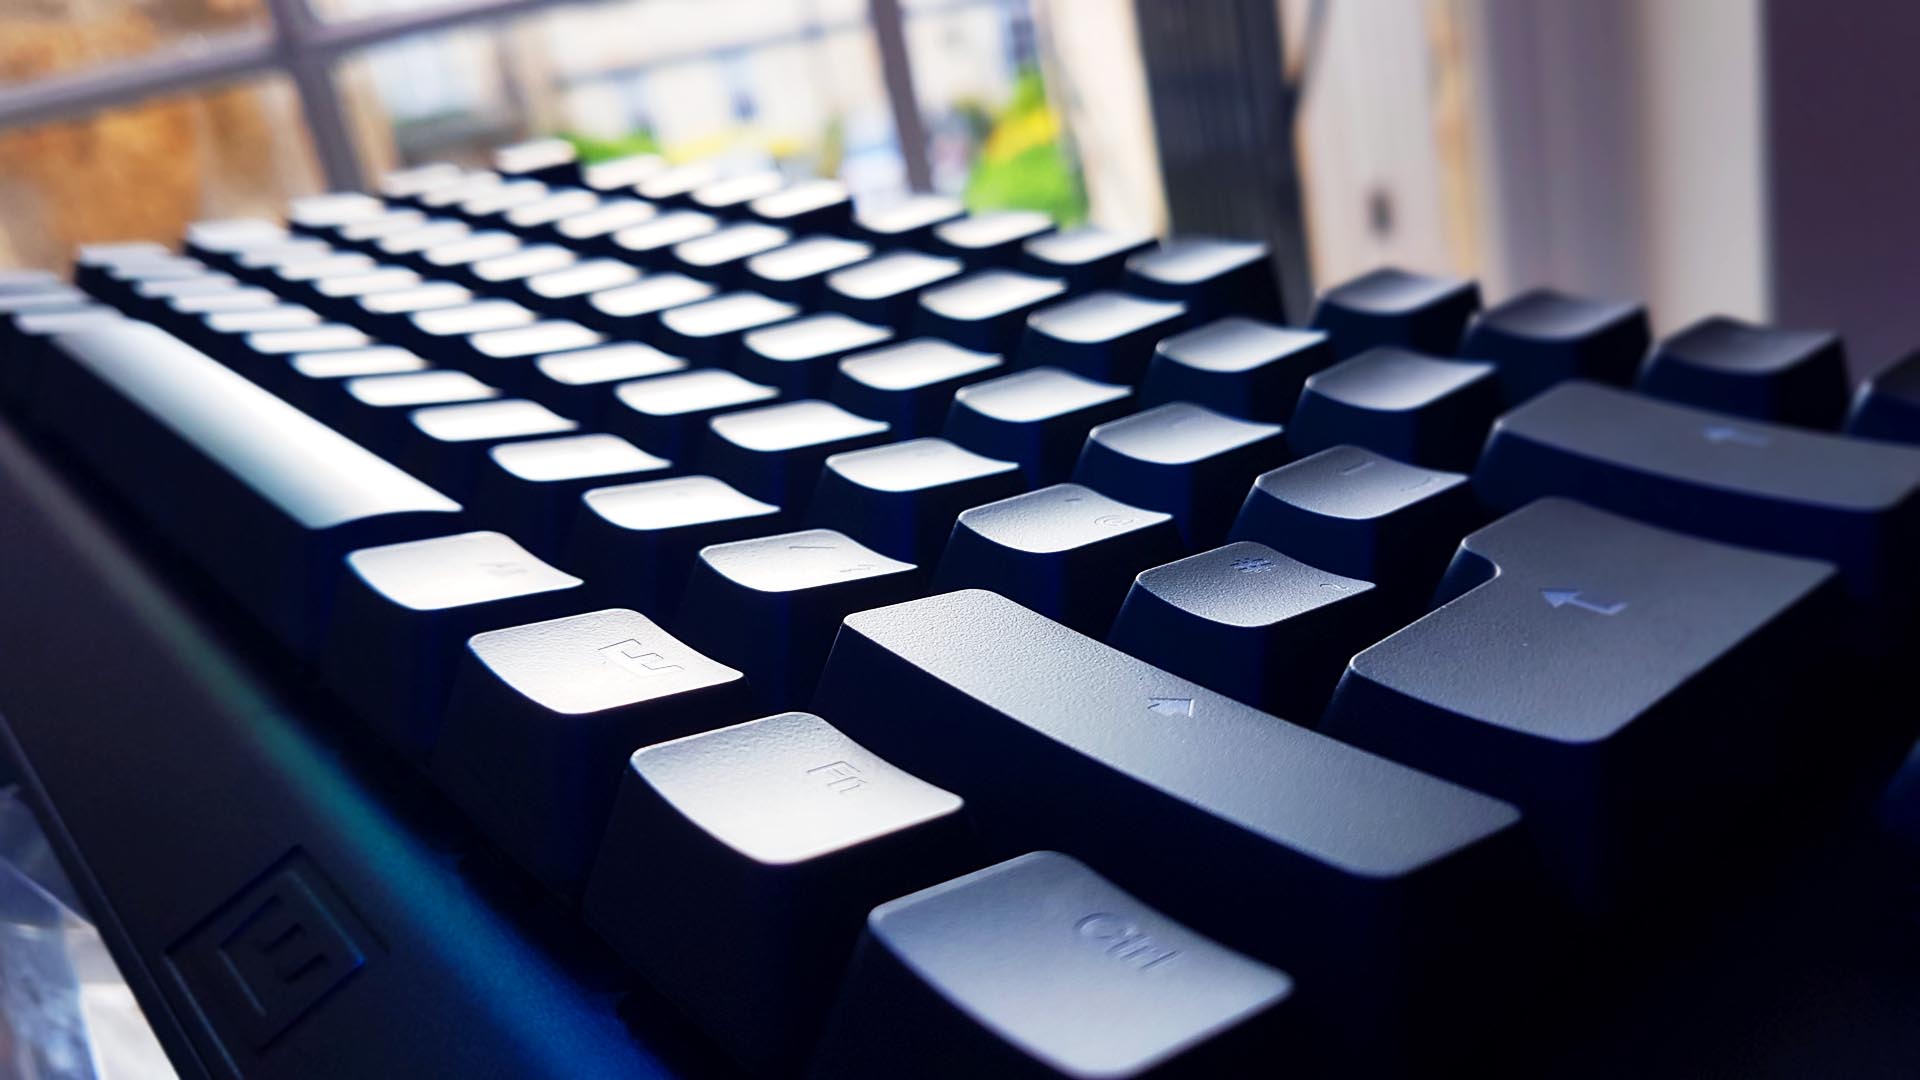 Best gaming keyboard – the top boards in 2021